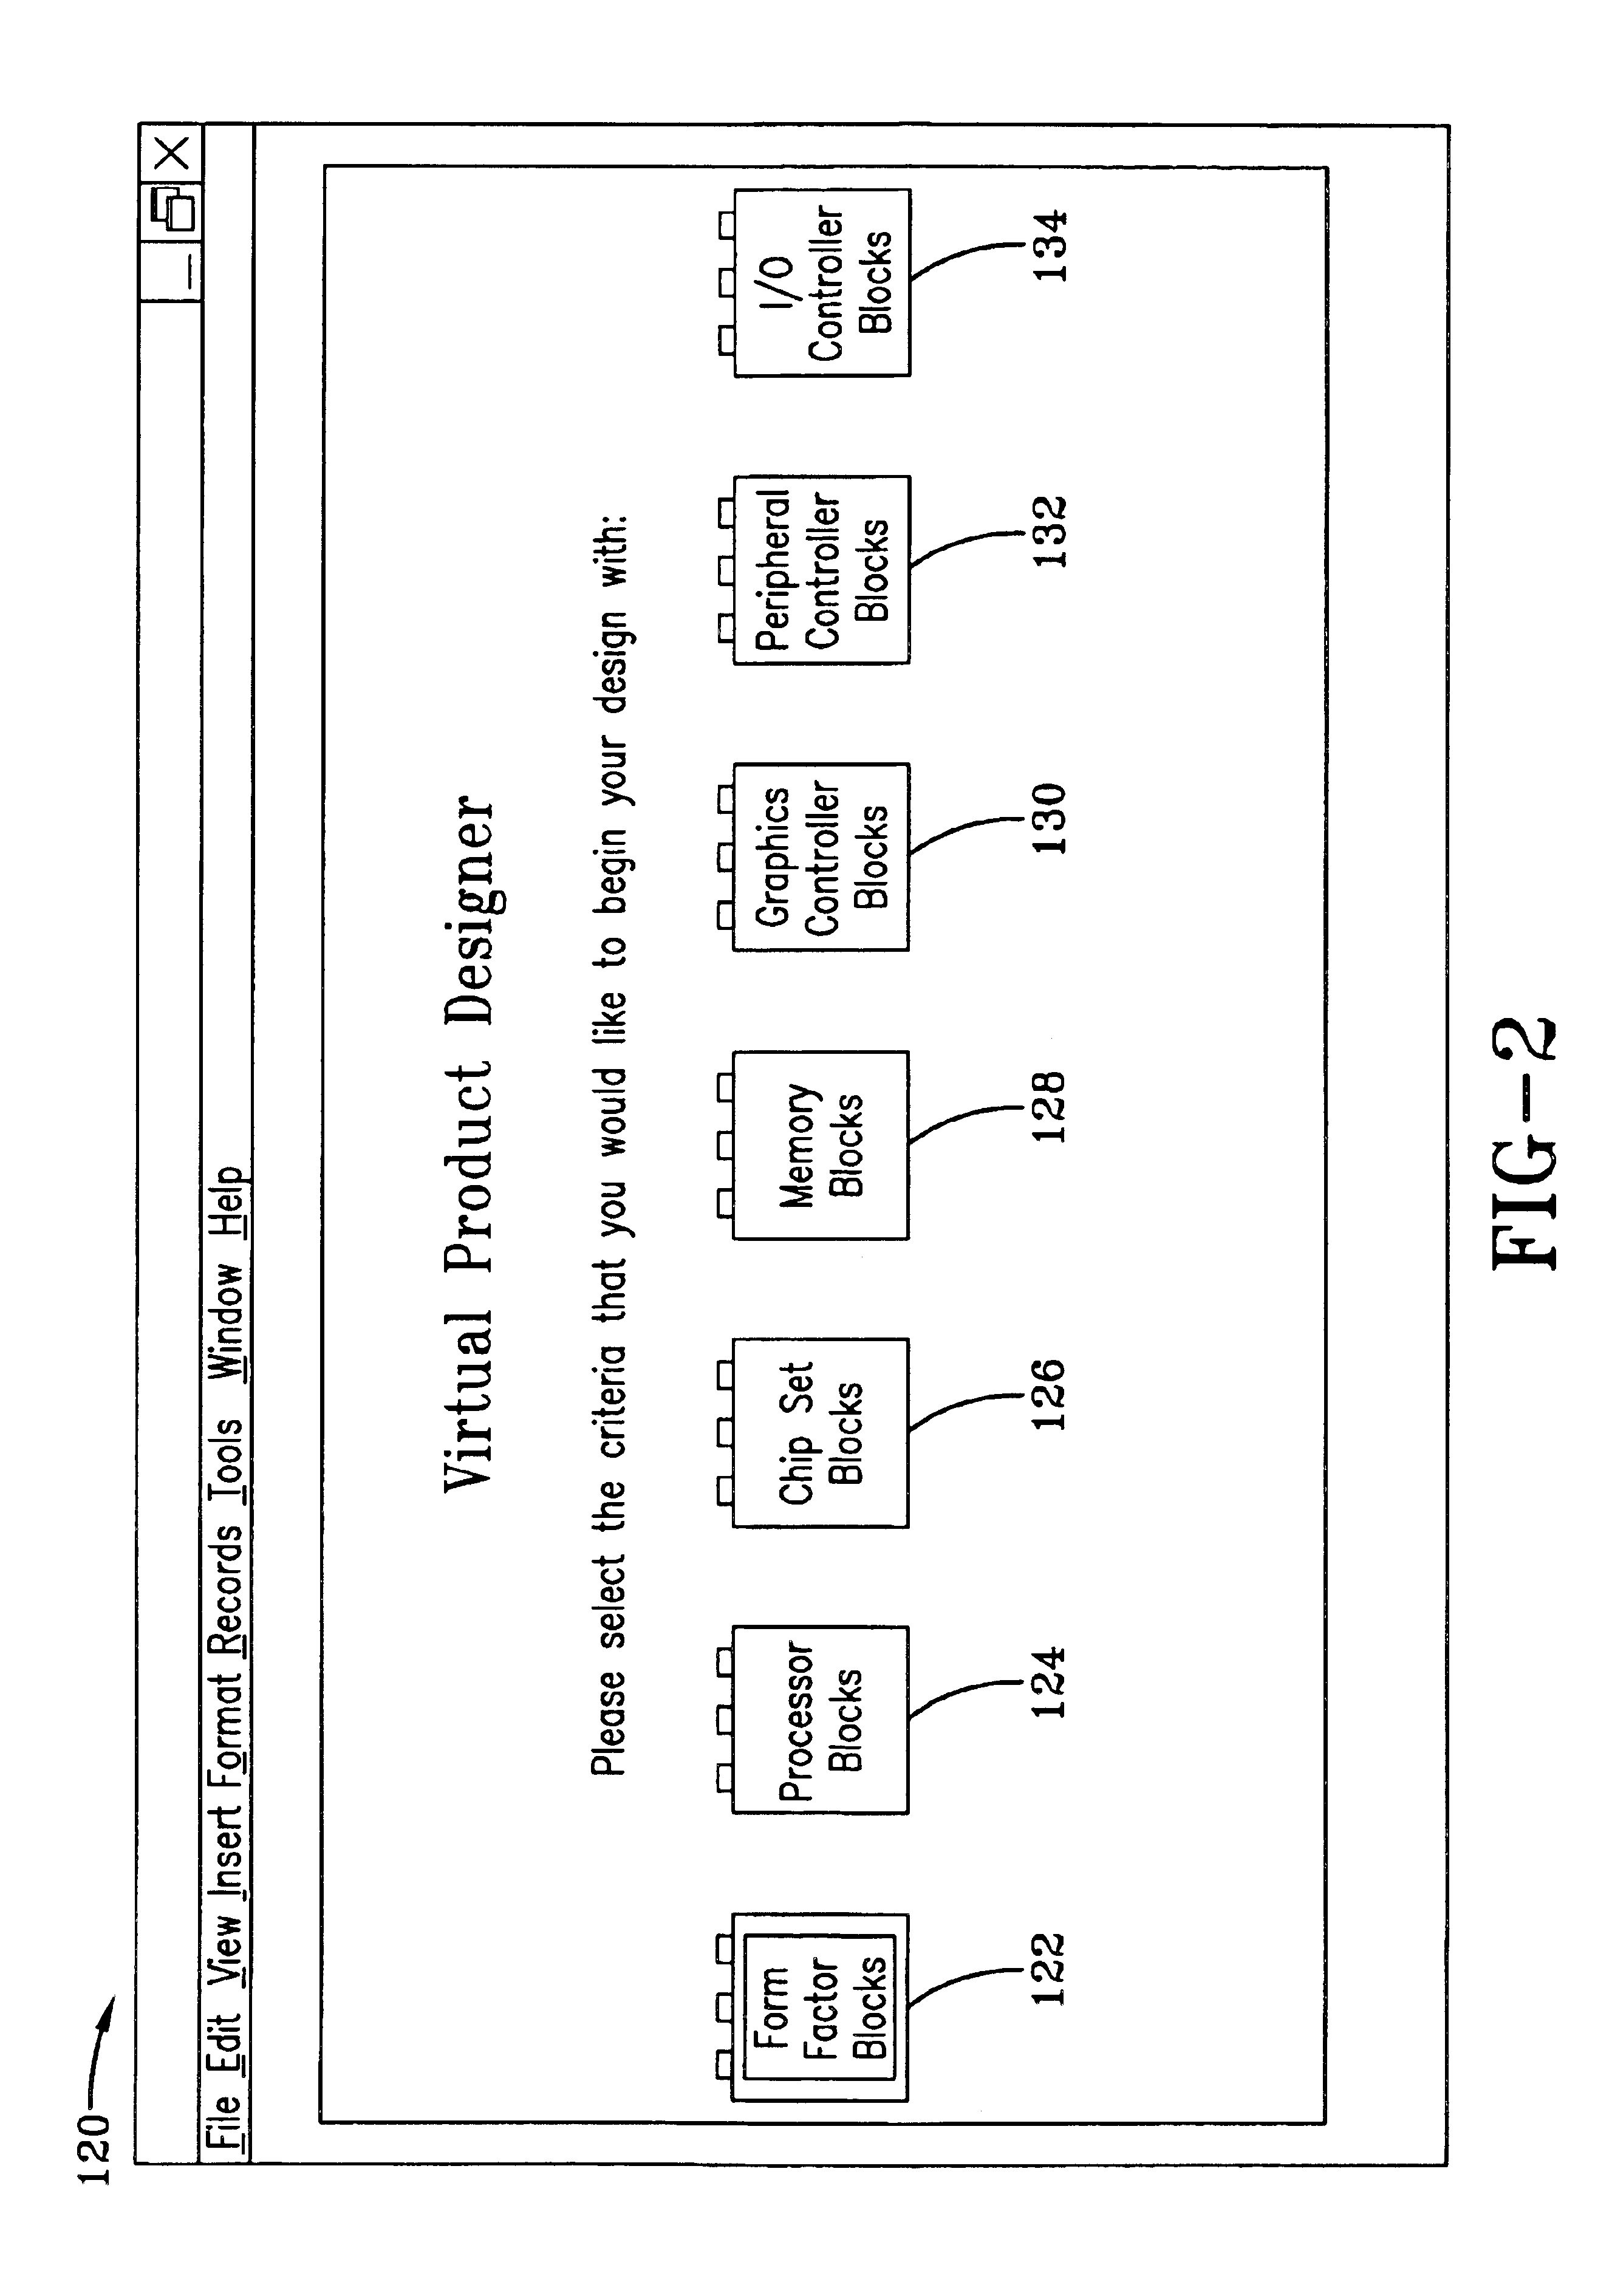 Single board computer quotation and design system and method